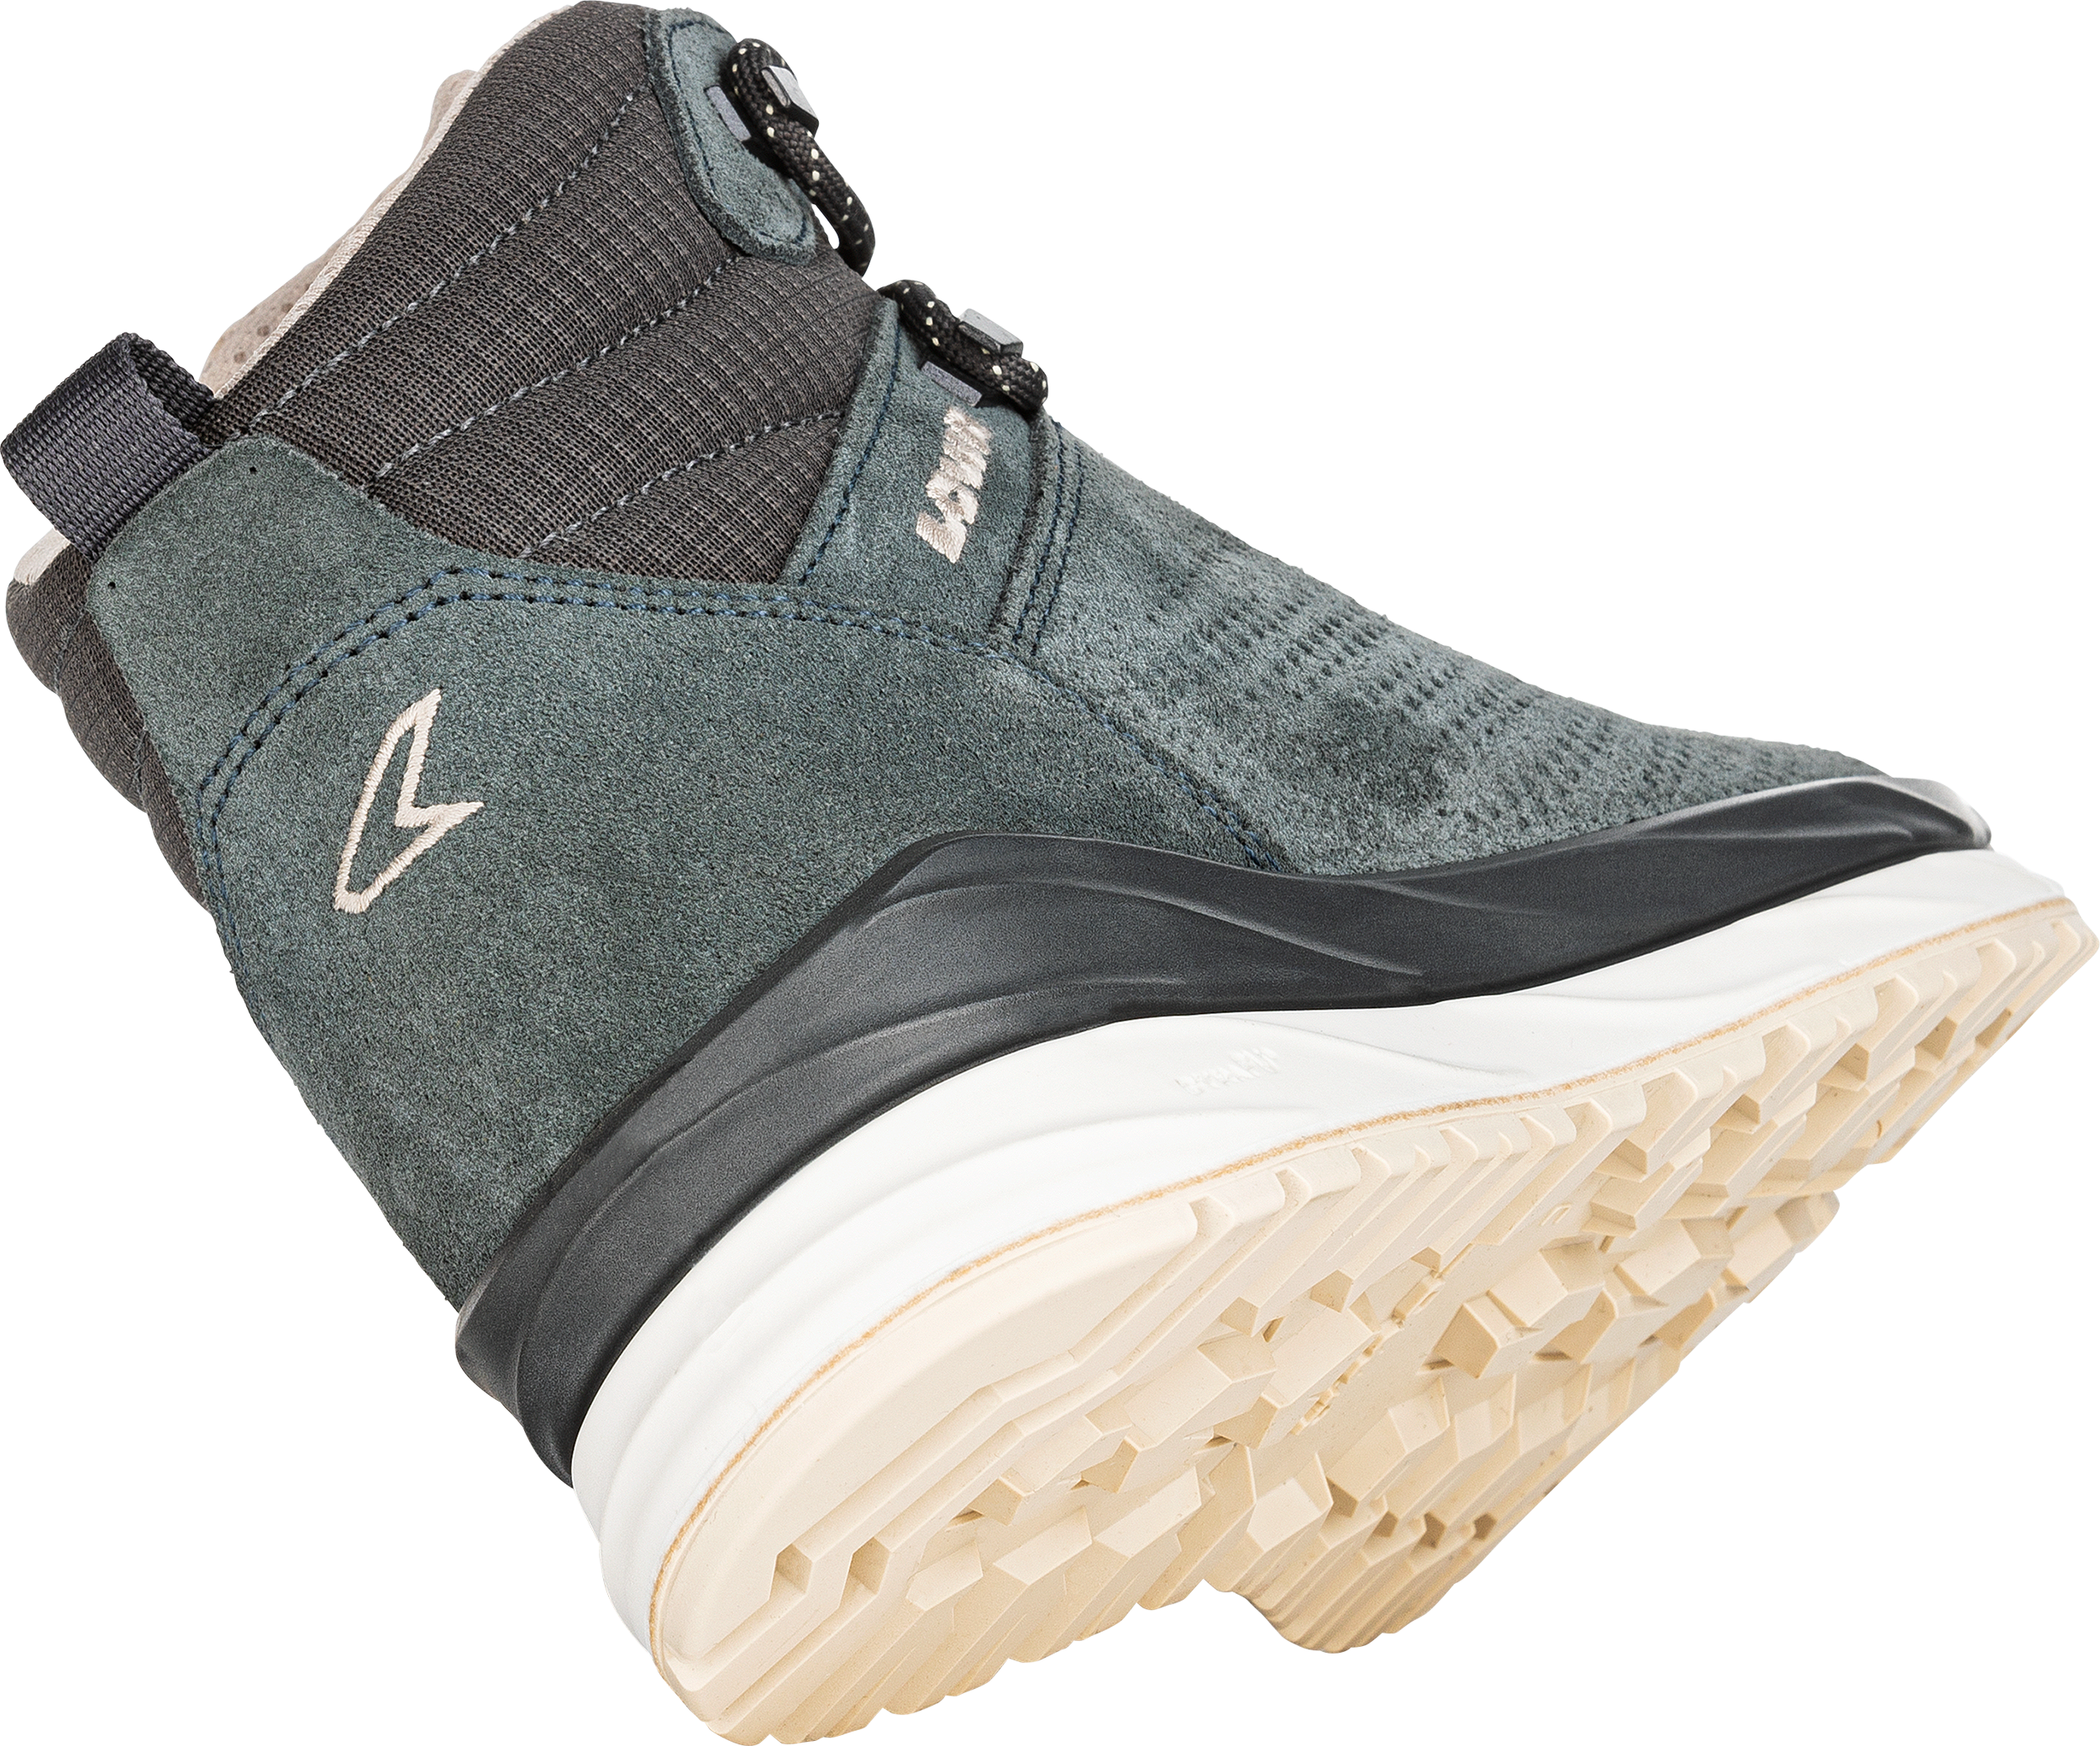 MALTA GTX MID Ws: EVERYDAY shoes for women: Functionality and LOWA INT